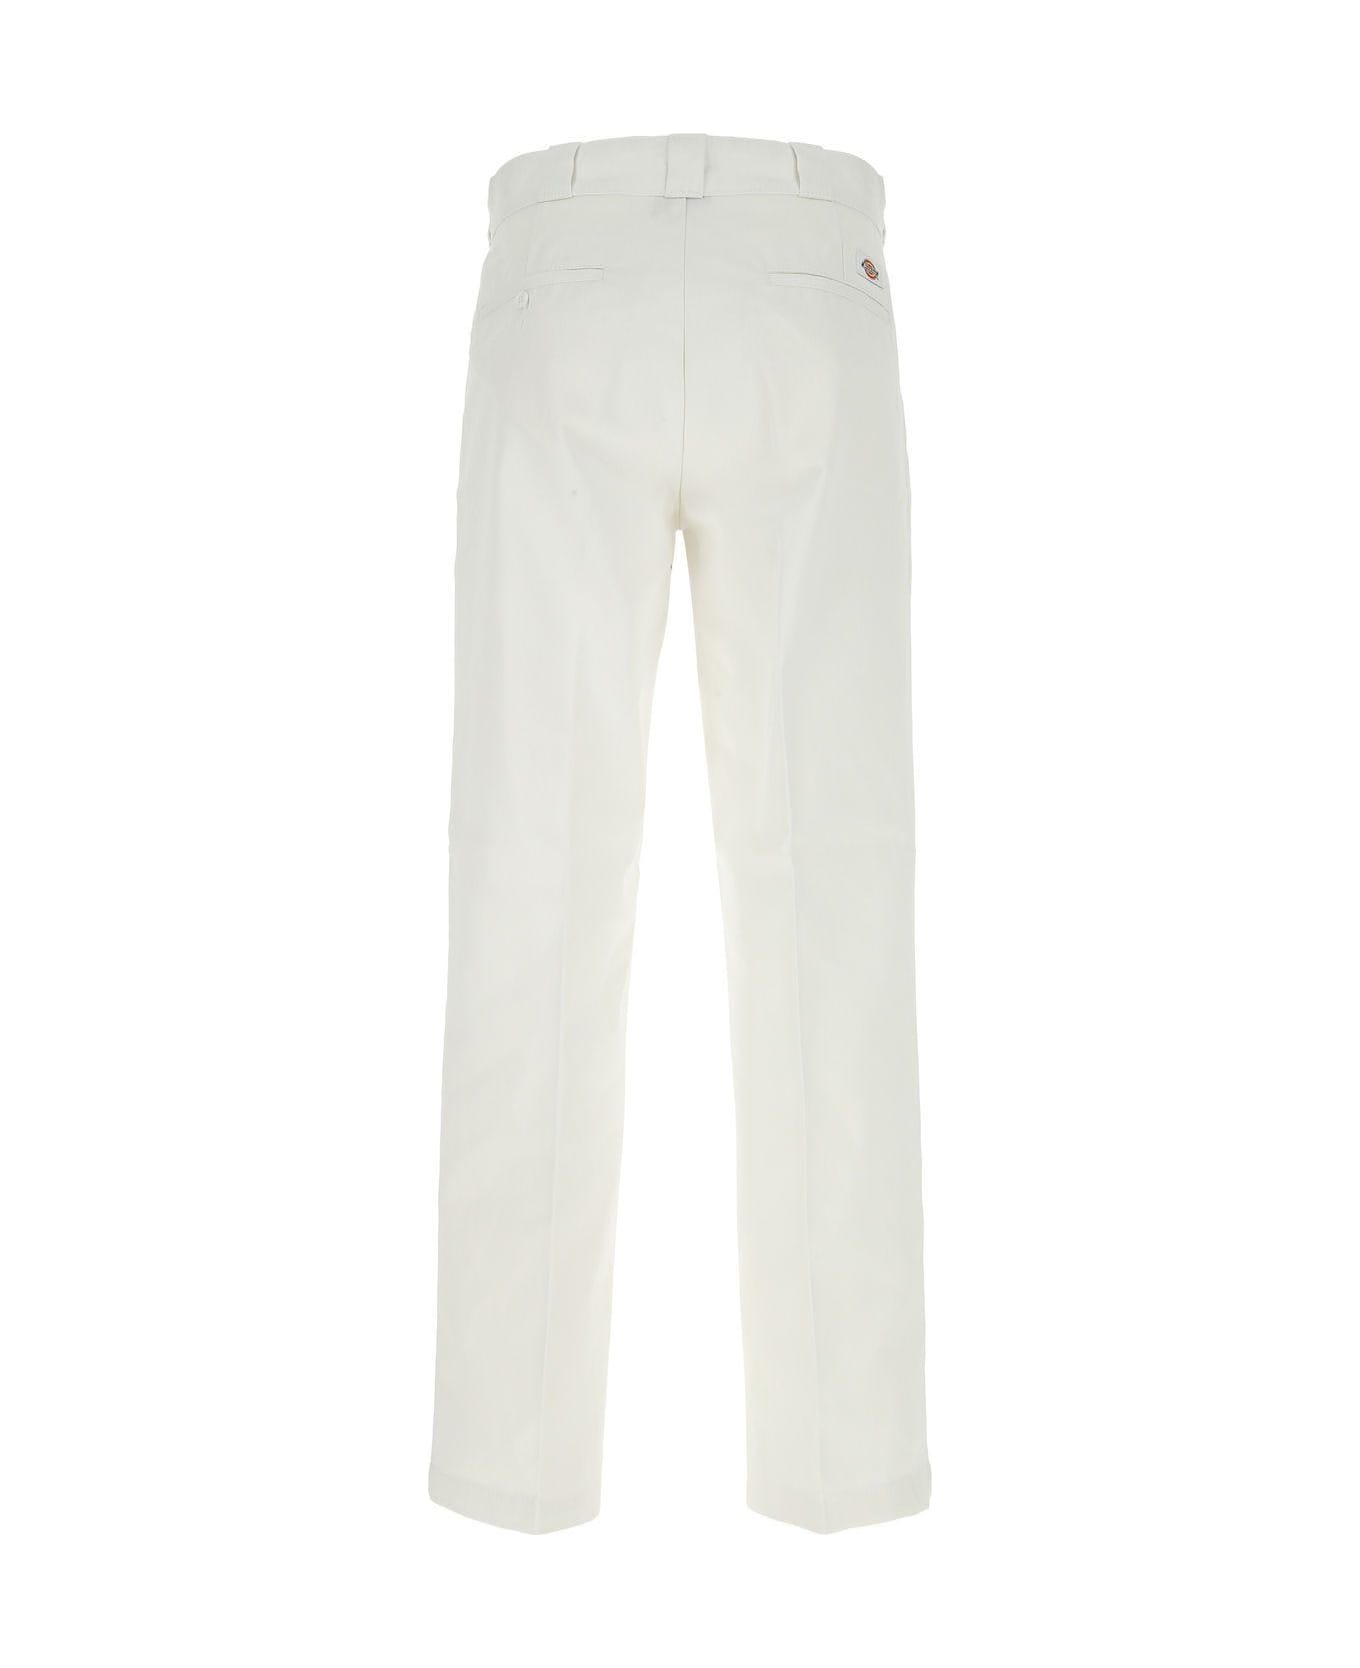 Dickies White Polyester Blend Pant - WHITE ボトムス